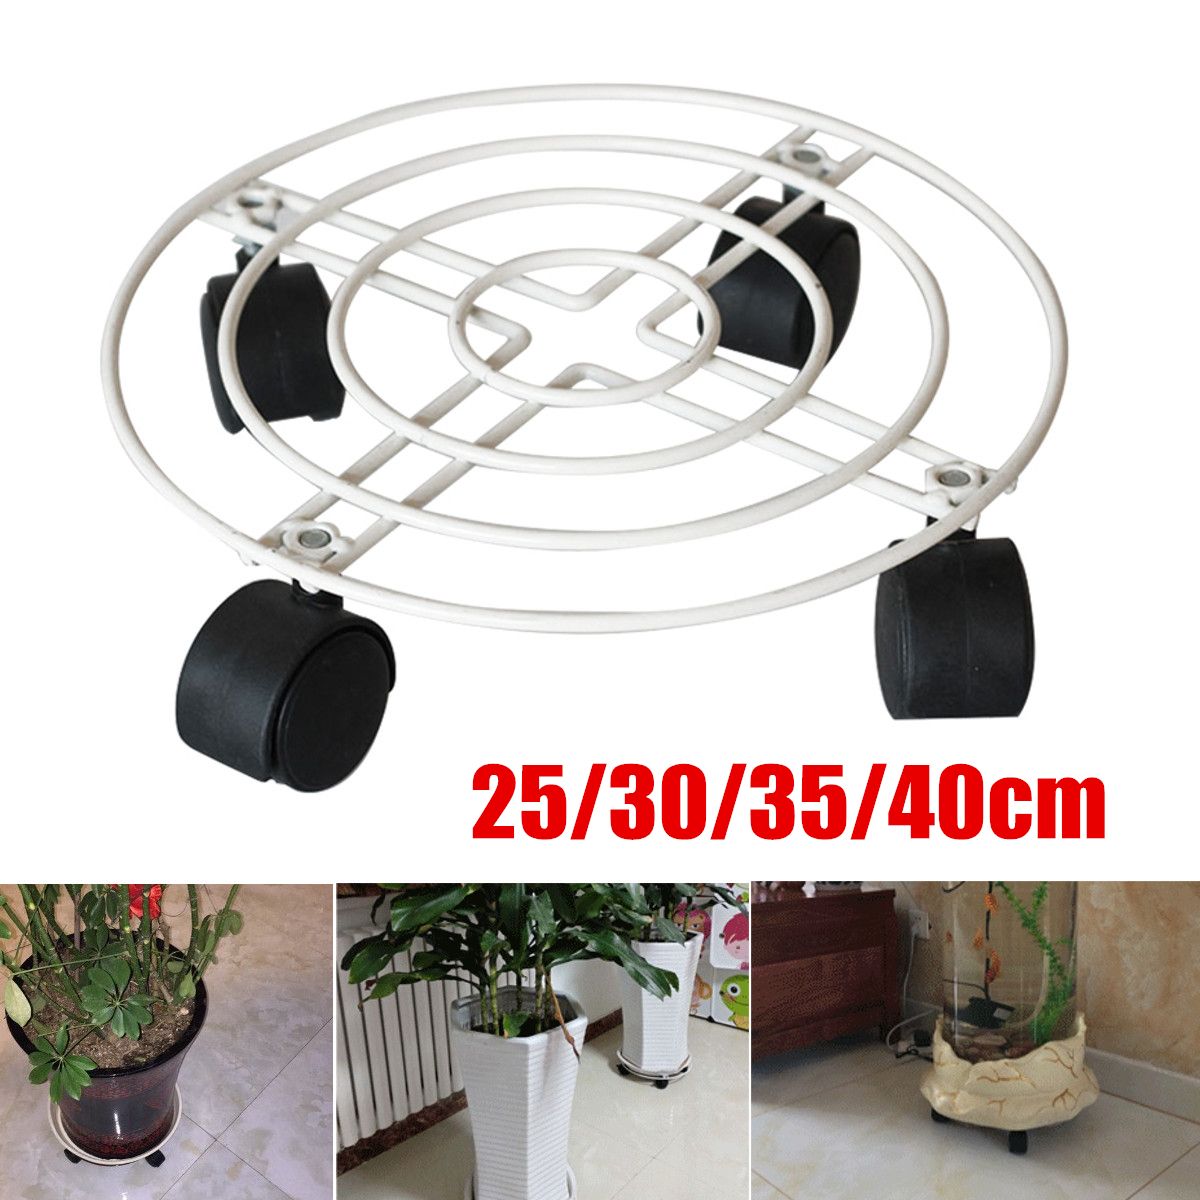 25-40cm-Plant-Pot-Round-Wheels-Mover-Trolley-Caddy-Garden-Plate-Metal-Stand-Rolling-Plant-1336988